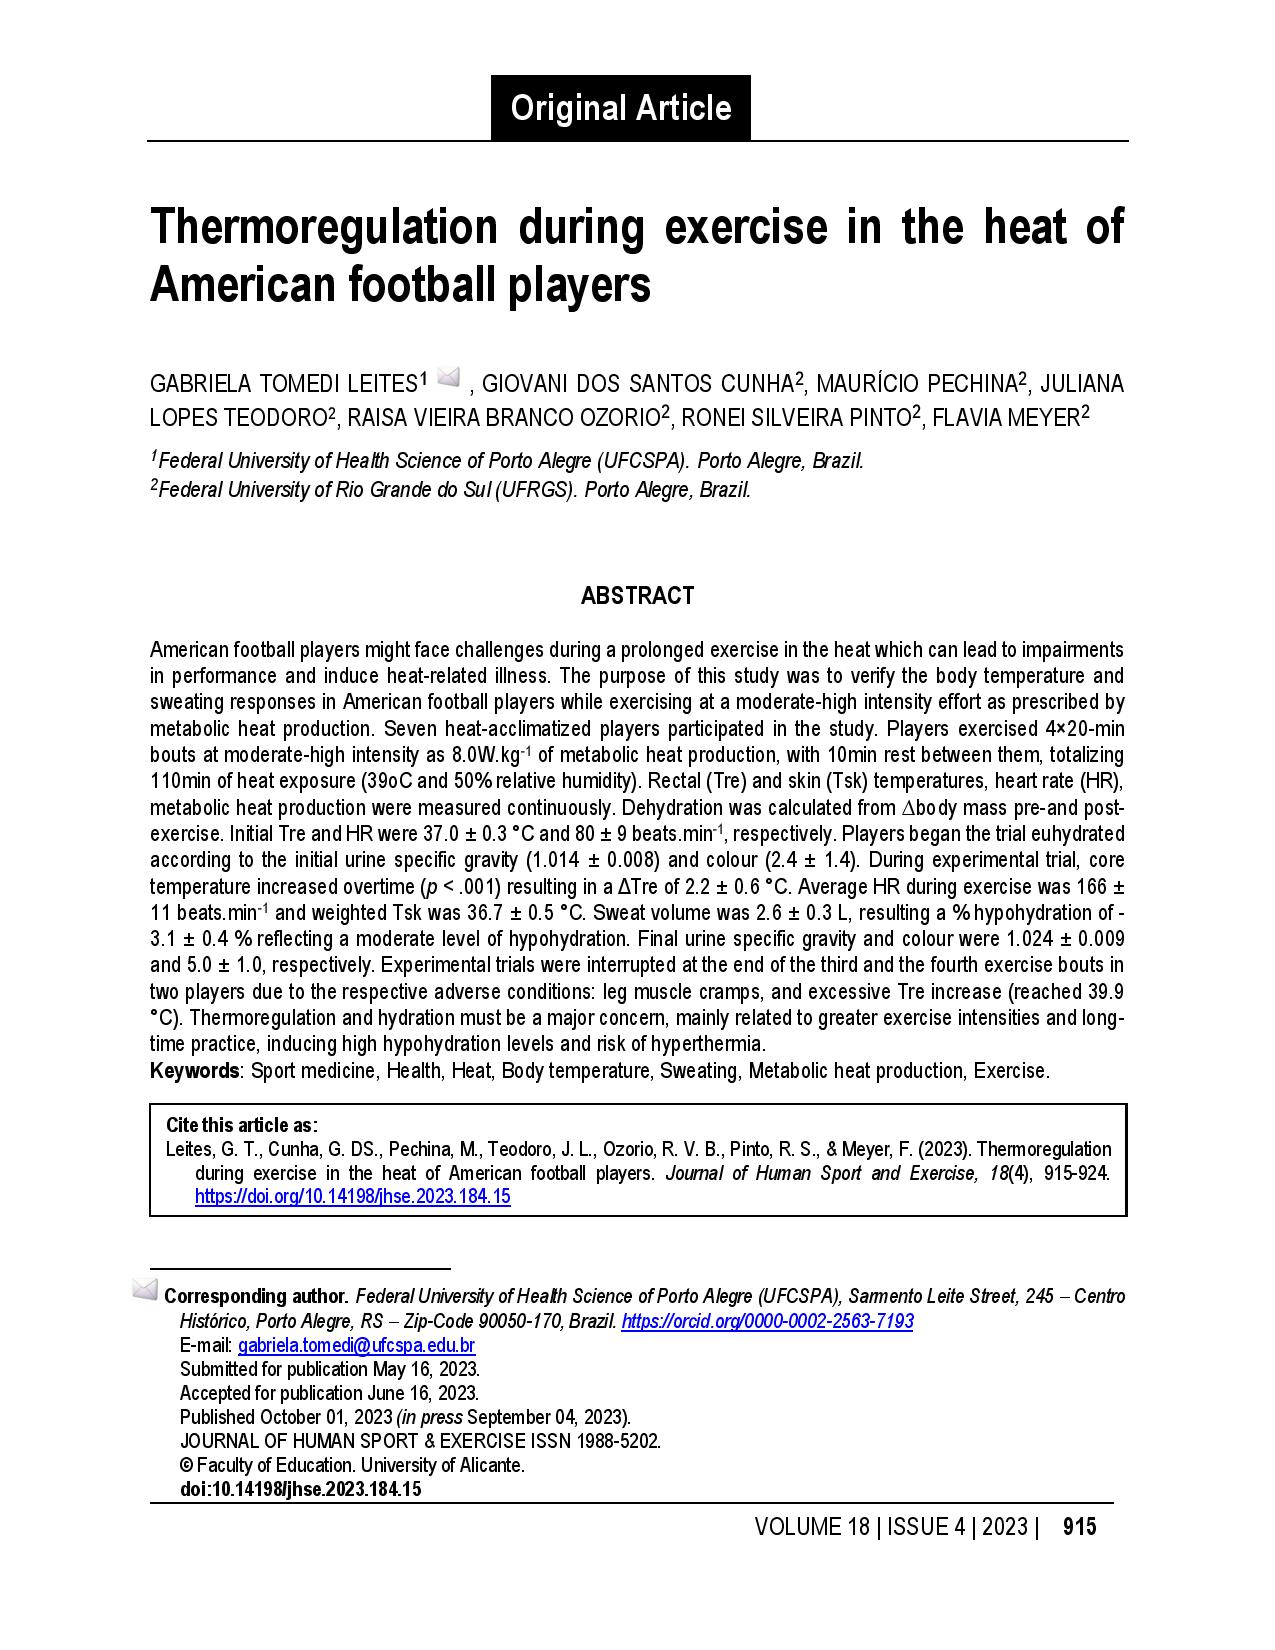 Thermoregulation during exercise in the heat of American football players